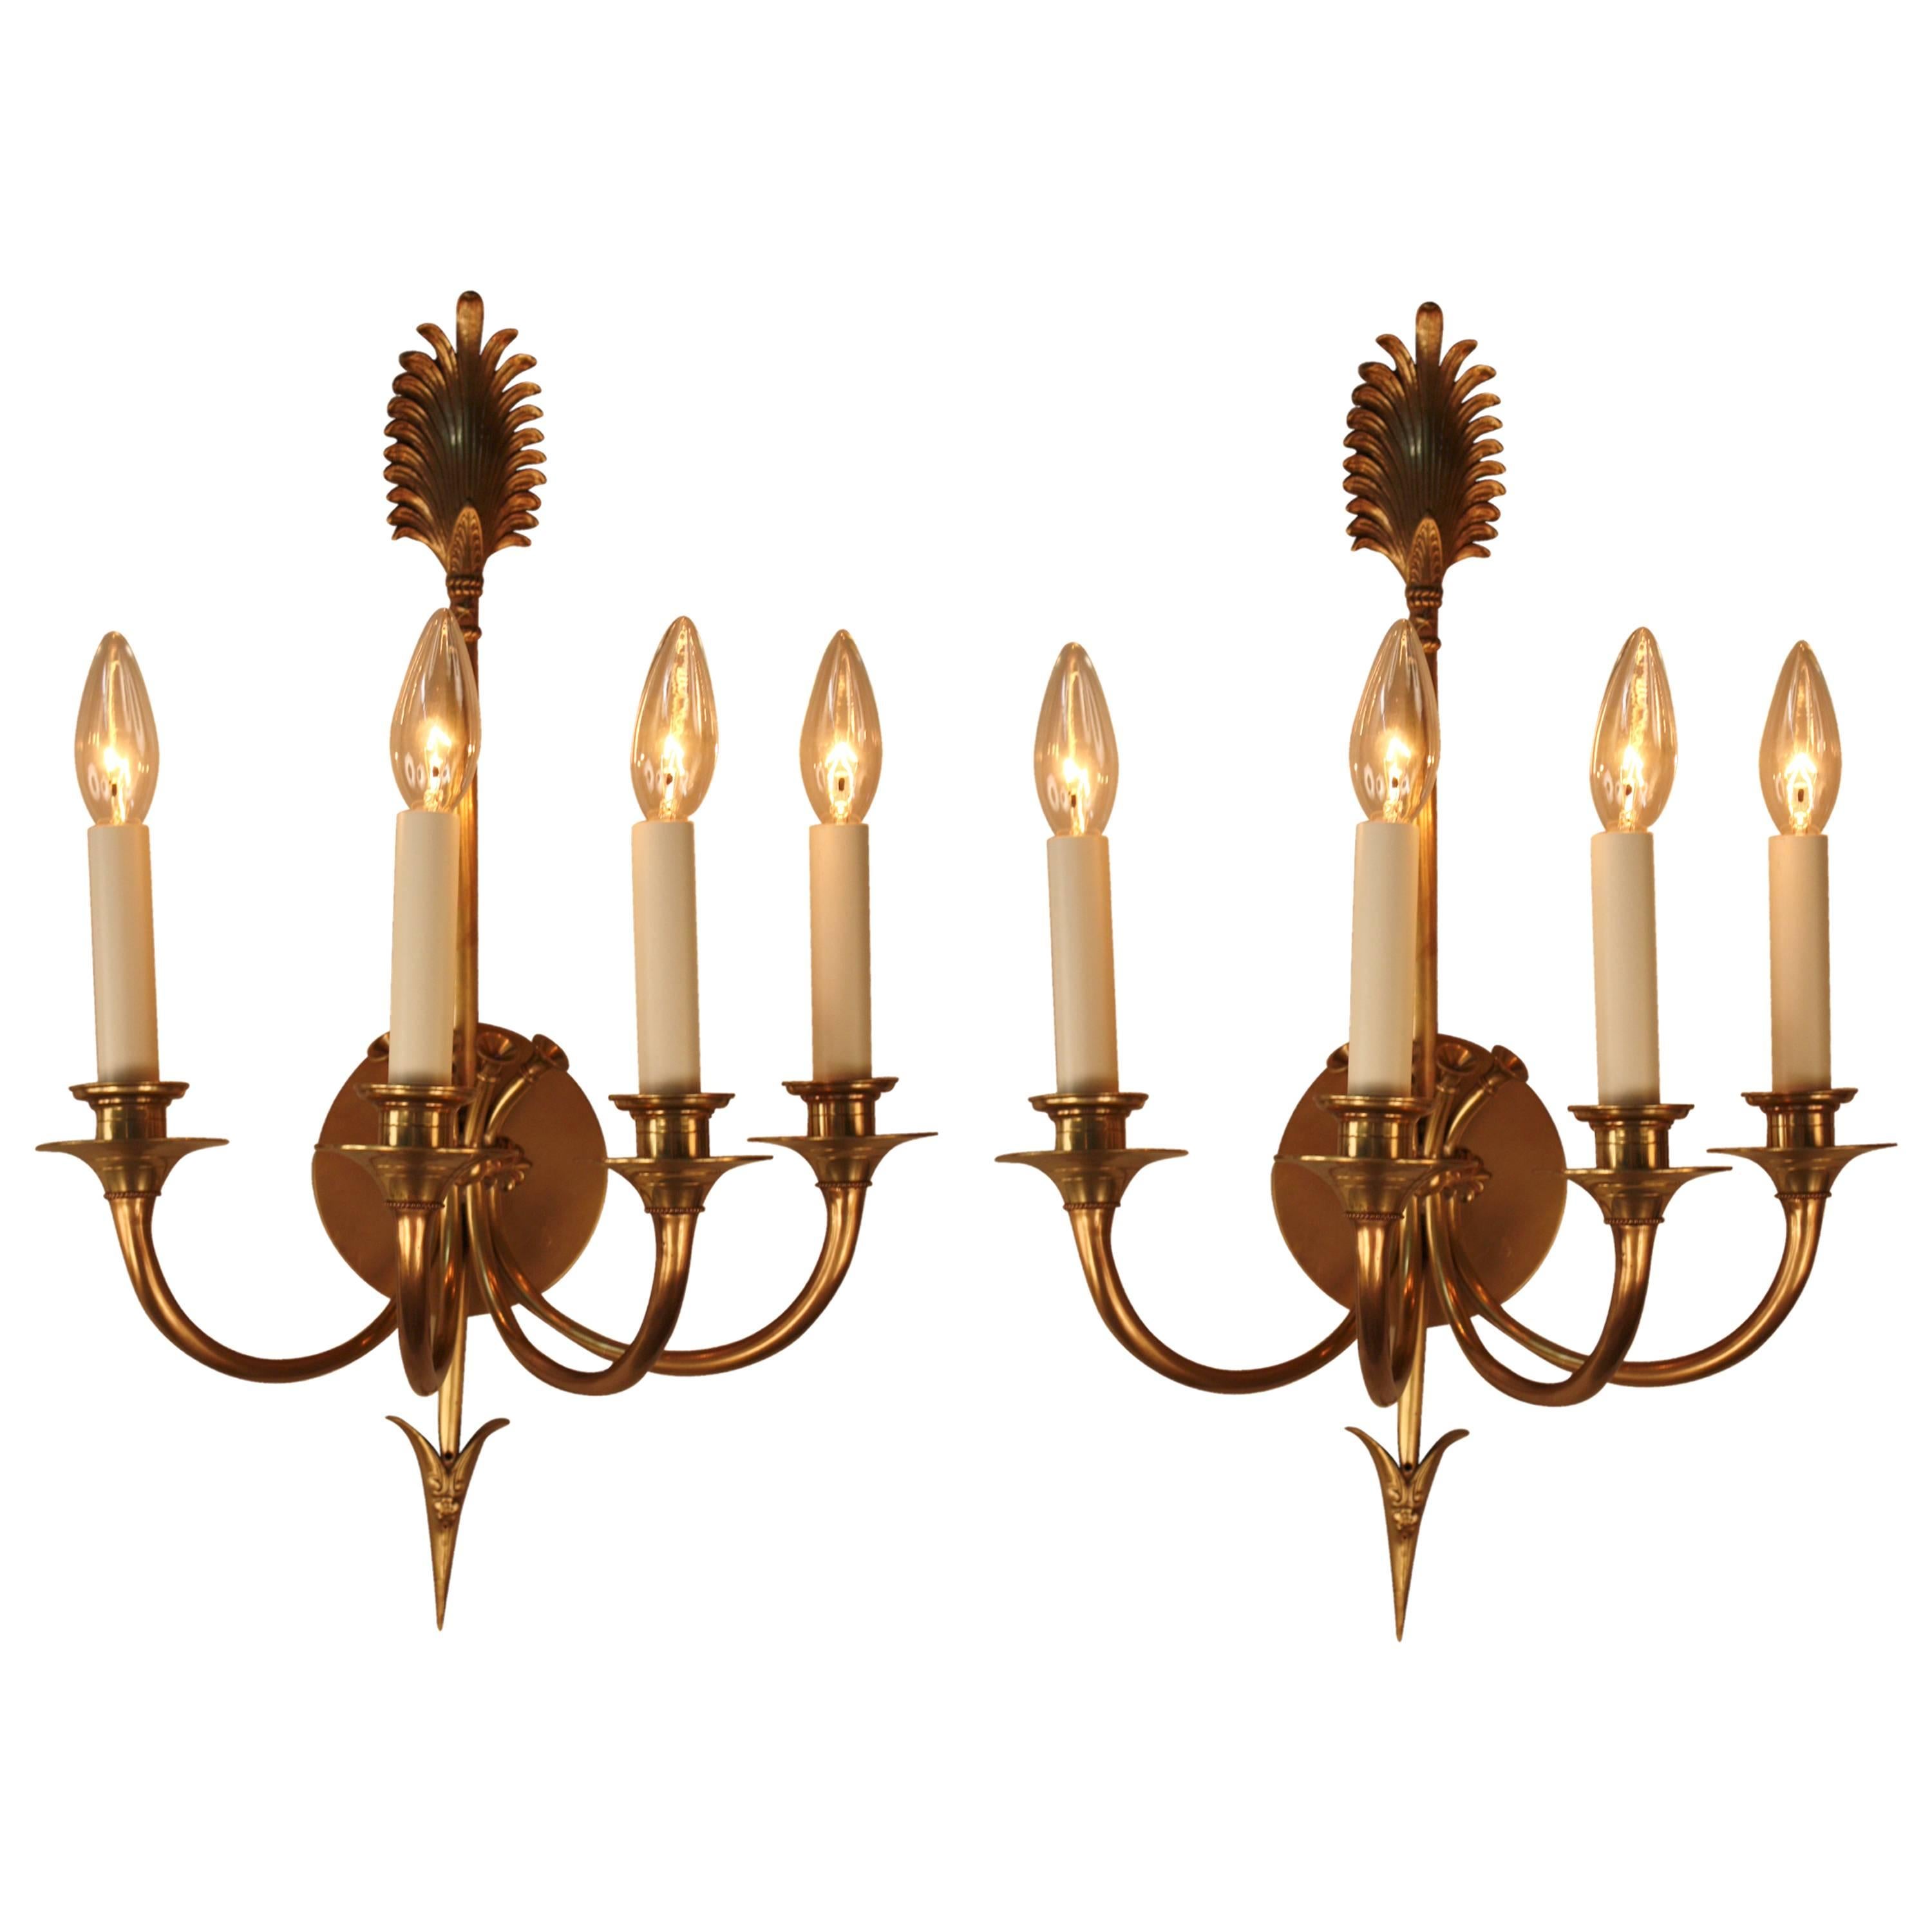 Pair of French Empire Style Bronze Wall Sconces